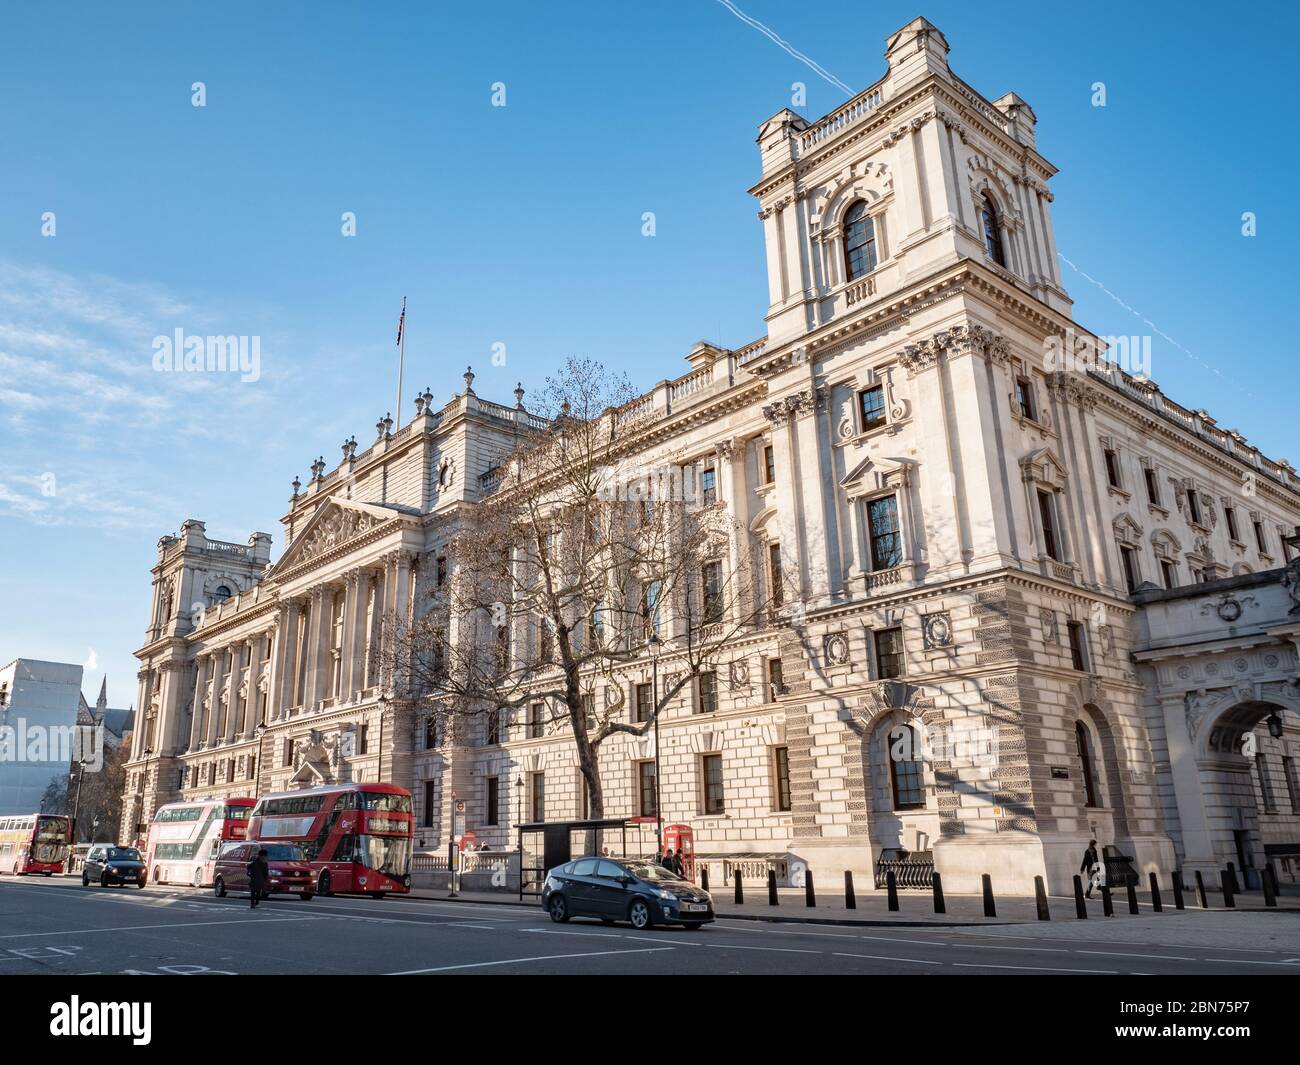 The HM Treasury building on Whitehall, London, is the British government department and office responsible for UK public finance and economic policy. Stock Photo